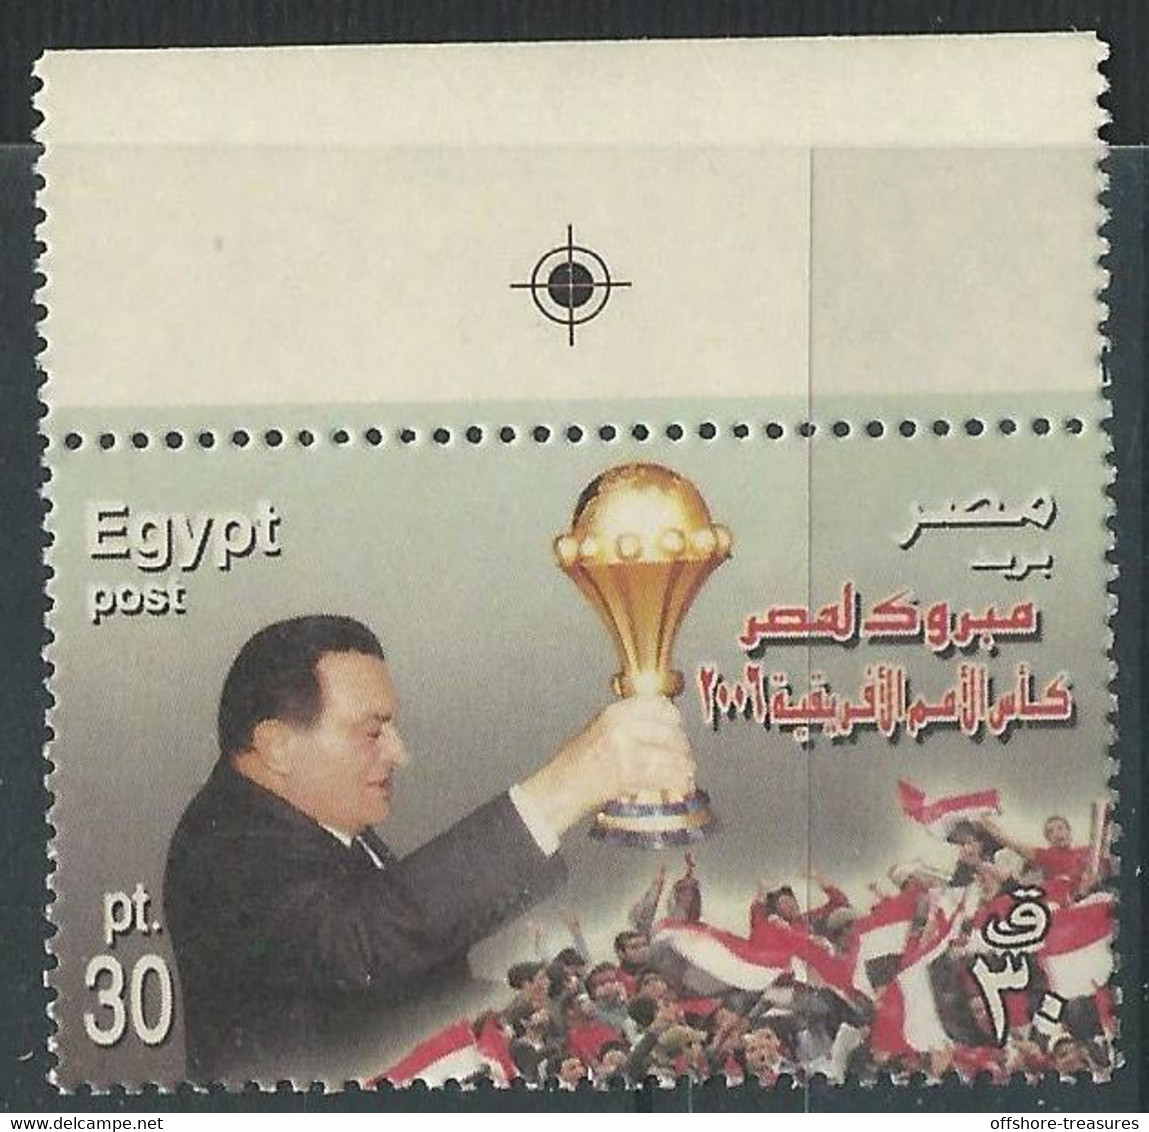 EGYPT STAMP 2006 SG 2429 President MUBARAK Holding TROPHY - African Nations Football Cup Champions - MNH - Ungebraucht